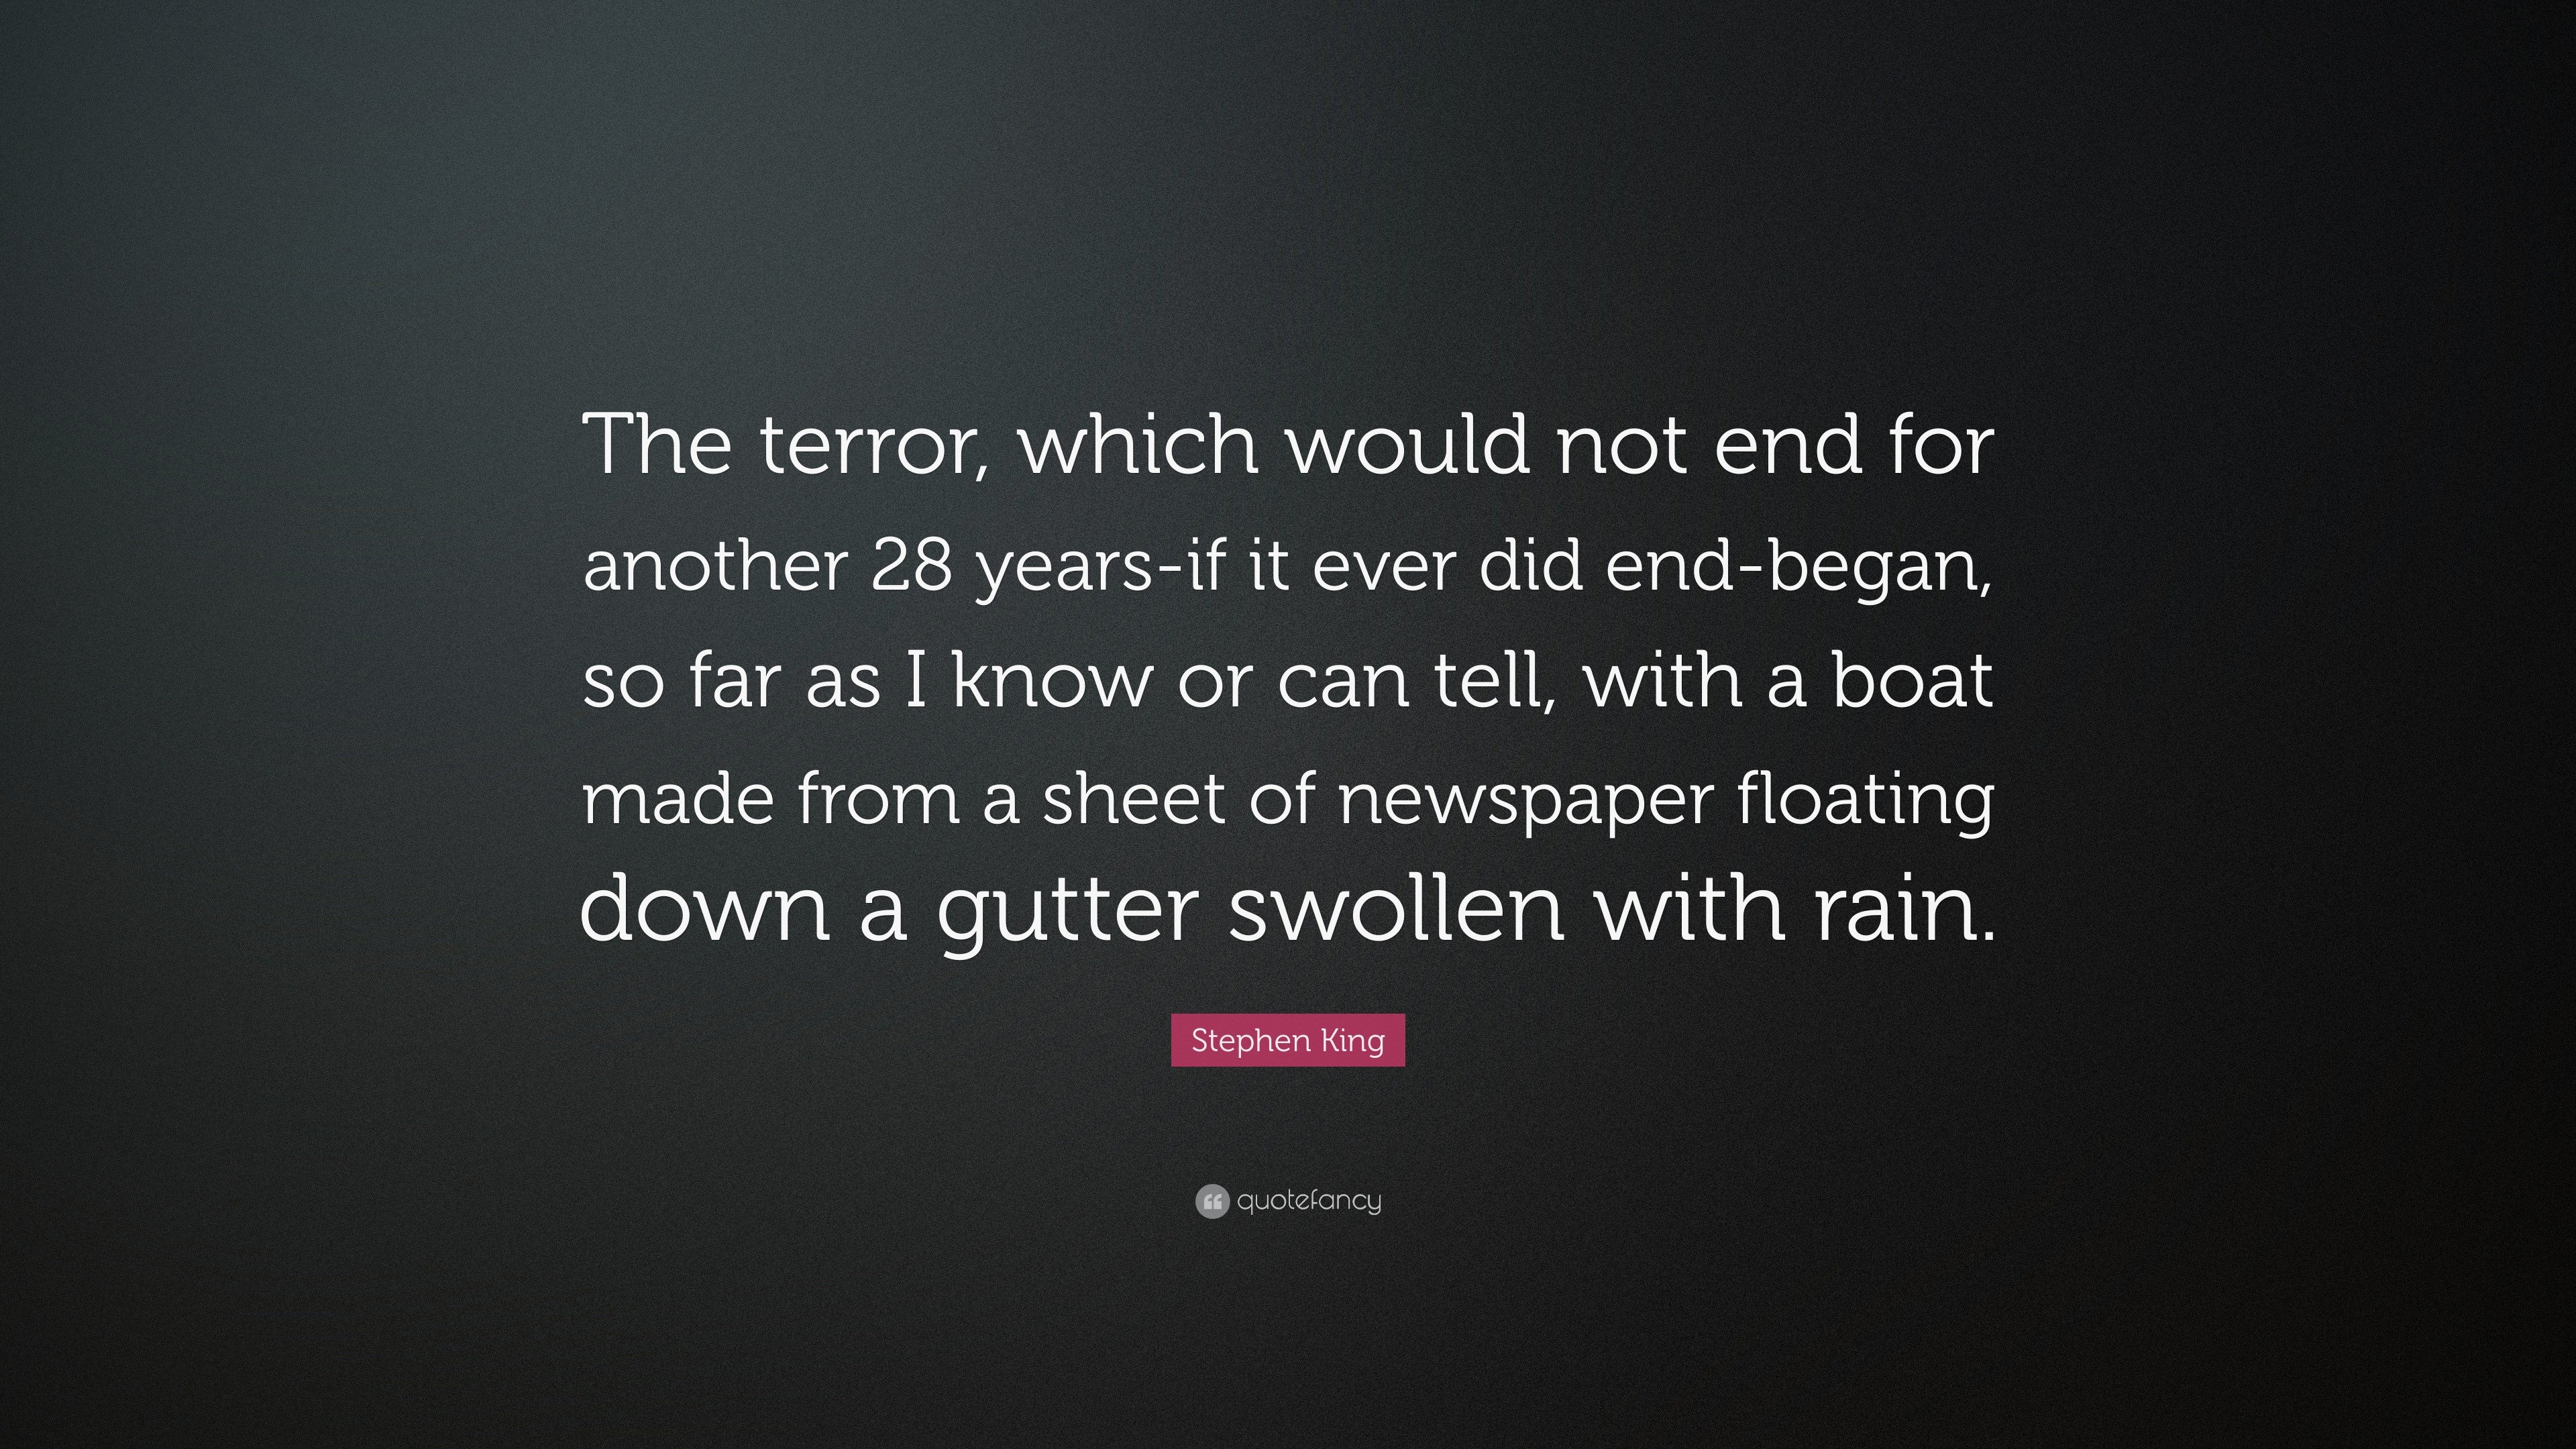 Stephen King Quotes: From Terror to Triumph